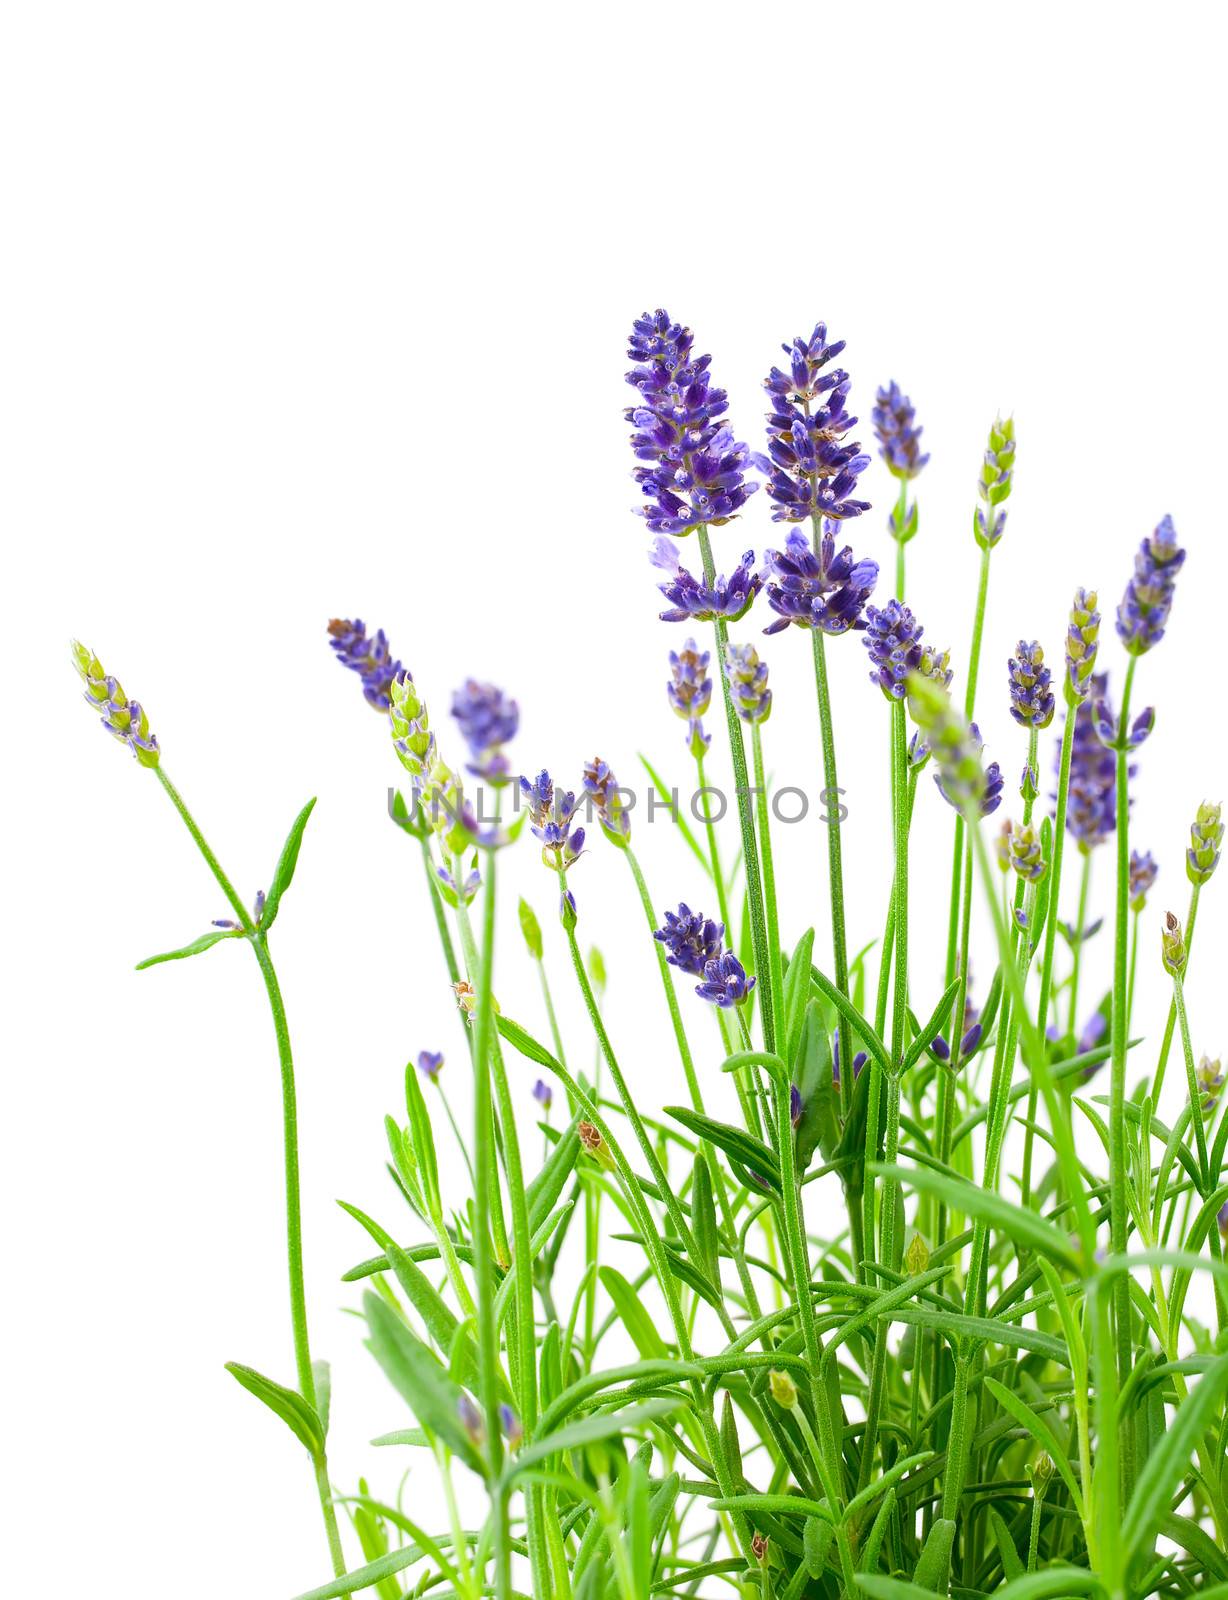 a bunch of lavender flowers on a white background by motorolka